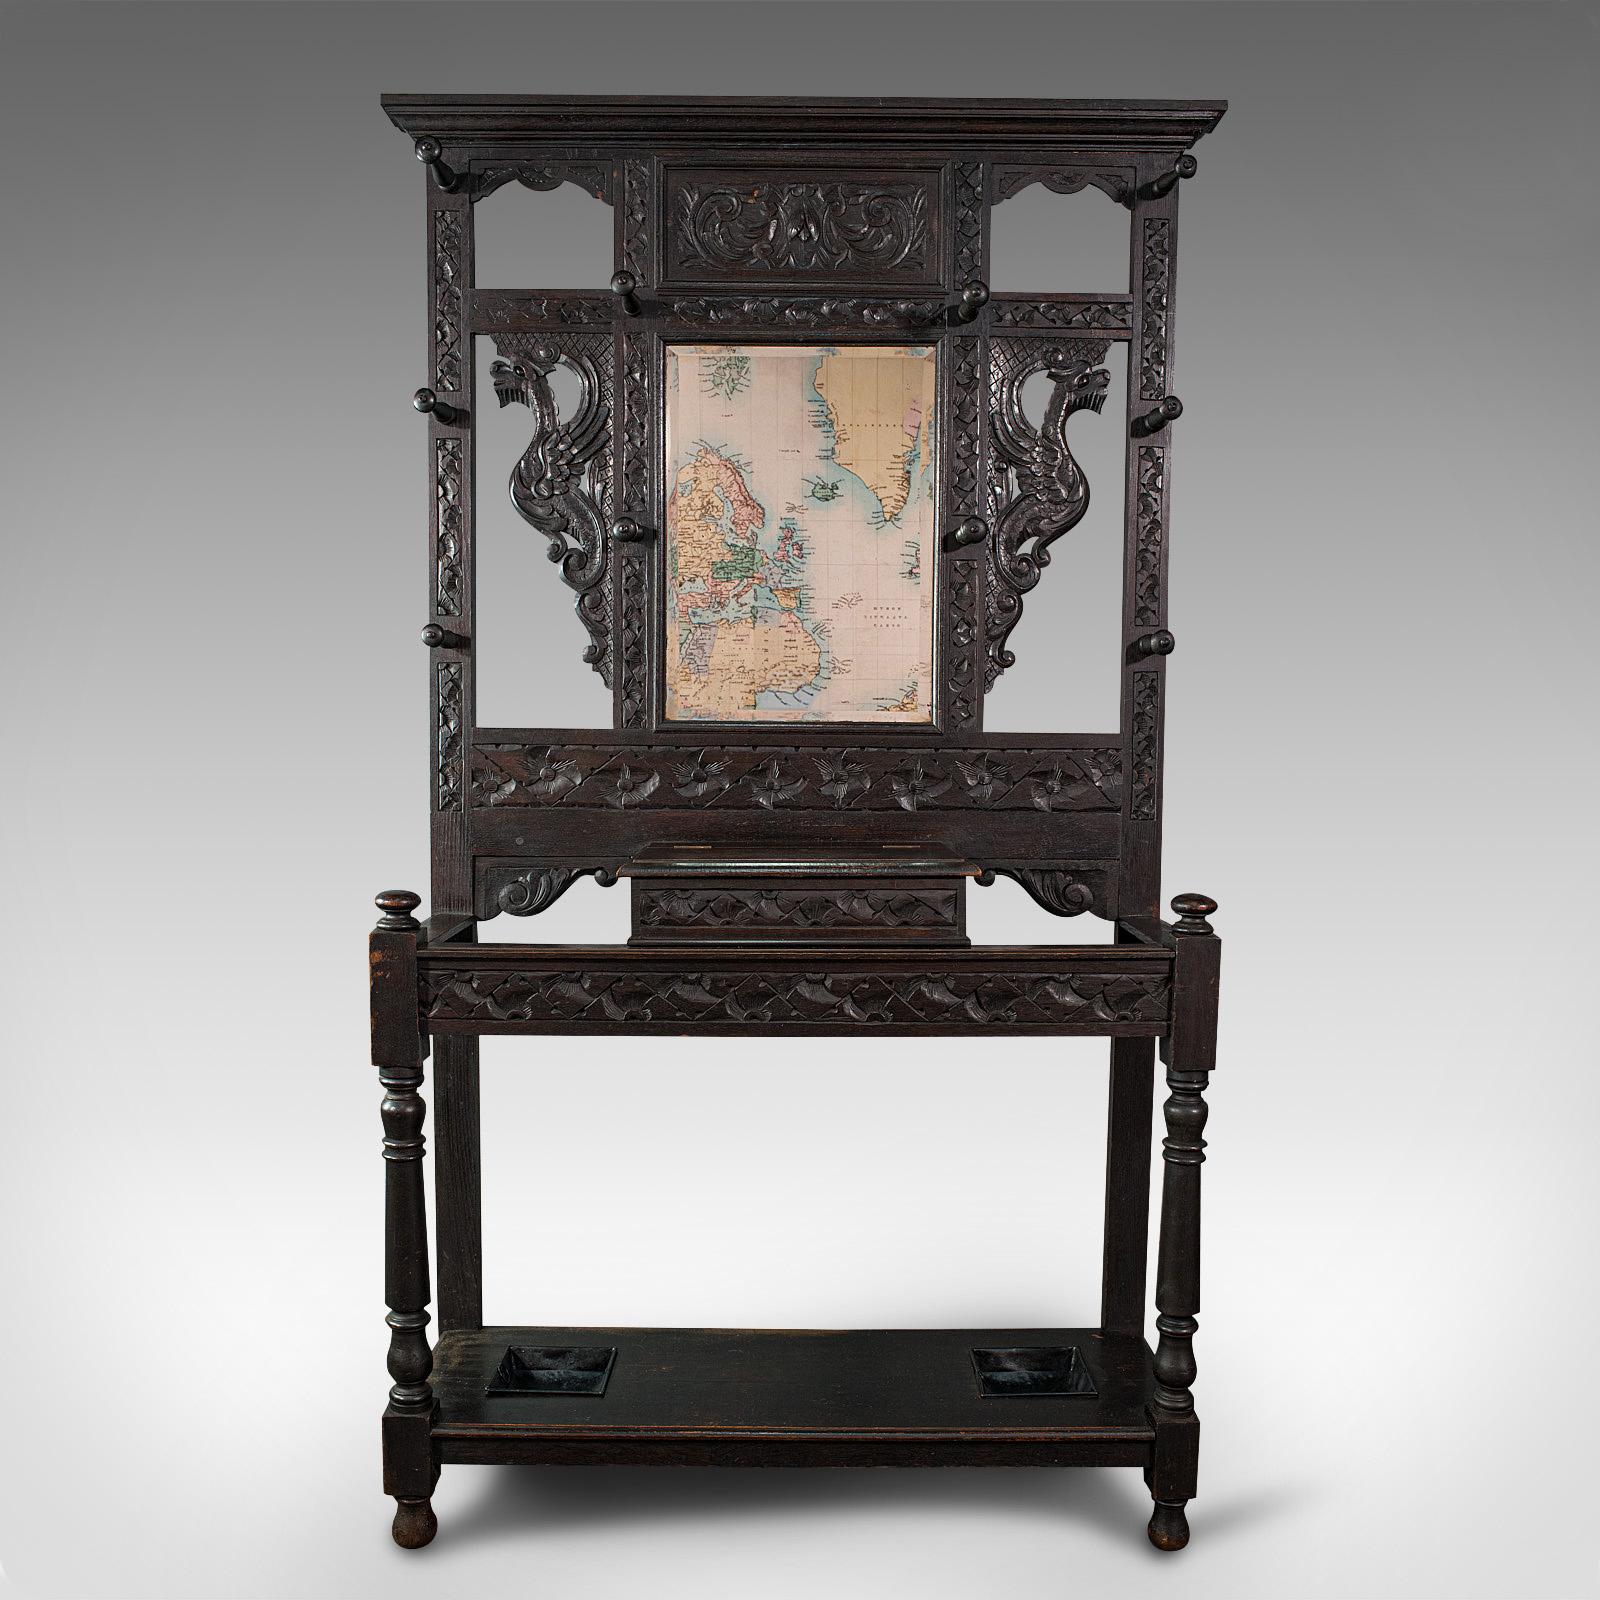 This is a tall antique hall stand. An English, oak stand with mirror and coat rack of carved Chinoiserie taste, dating to the Victorian period, circa 1880.

Distinctive Oriental carvings decorate this versatile stand
Displays a desirable aged